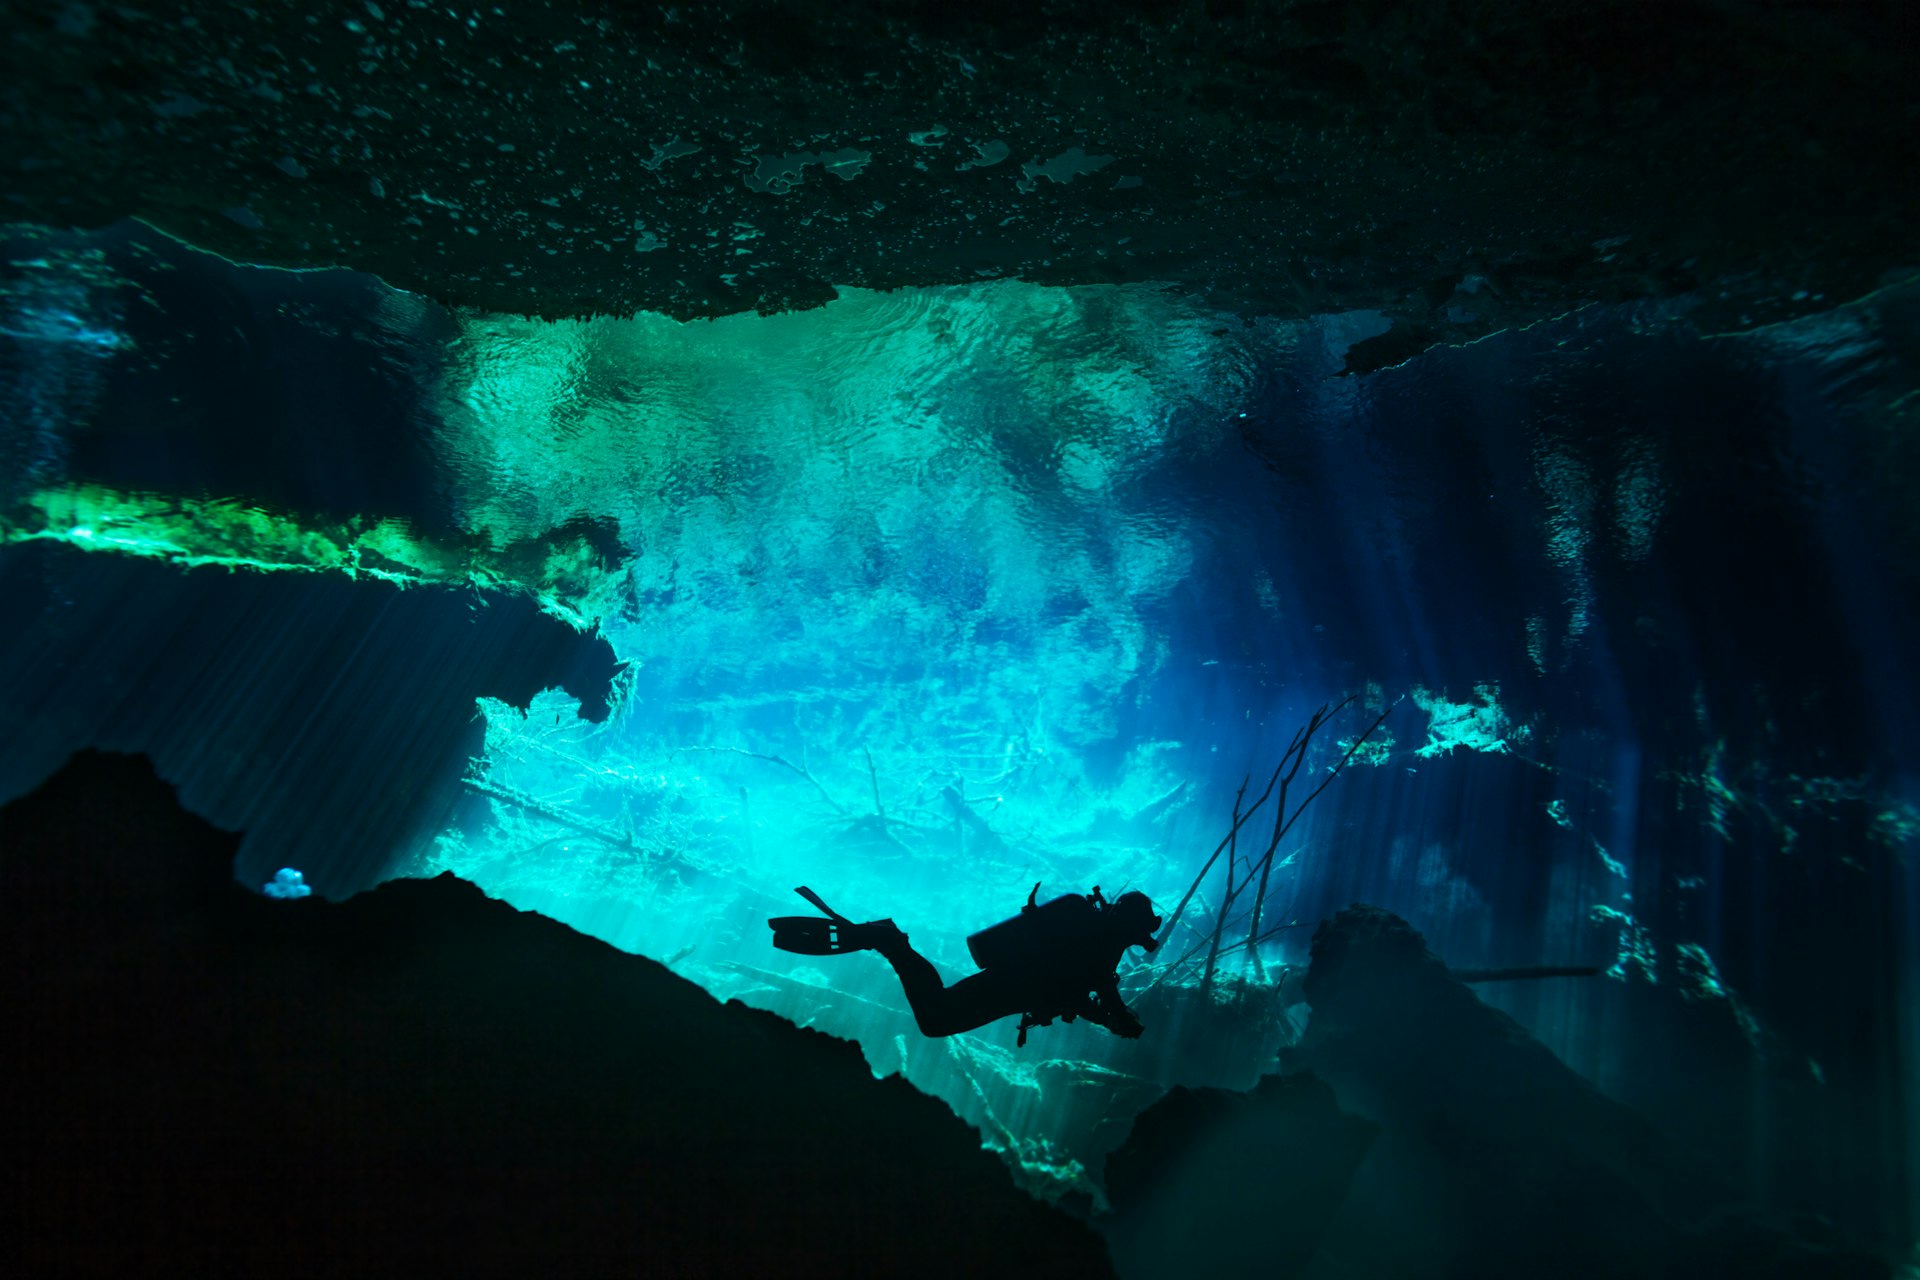 A scuba diver is silhouetted as they swim through blue water of a cave